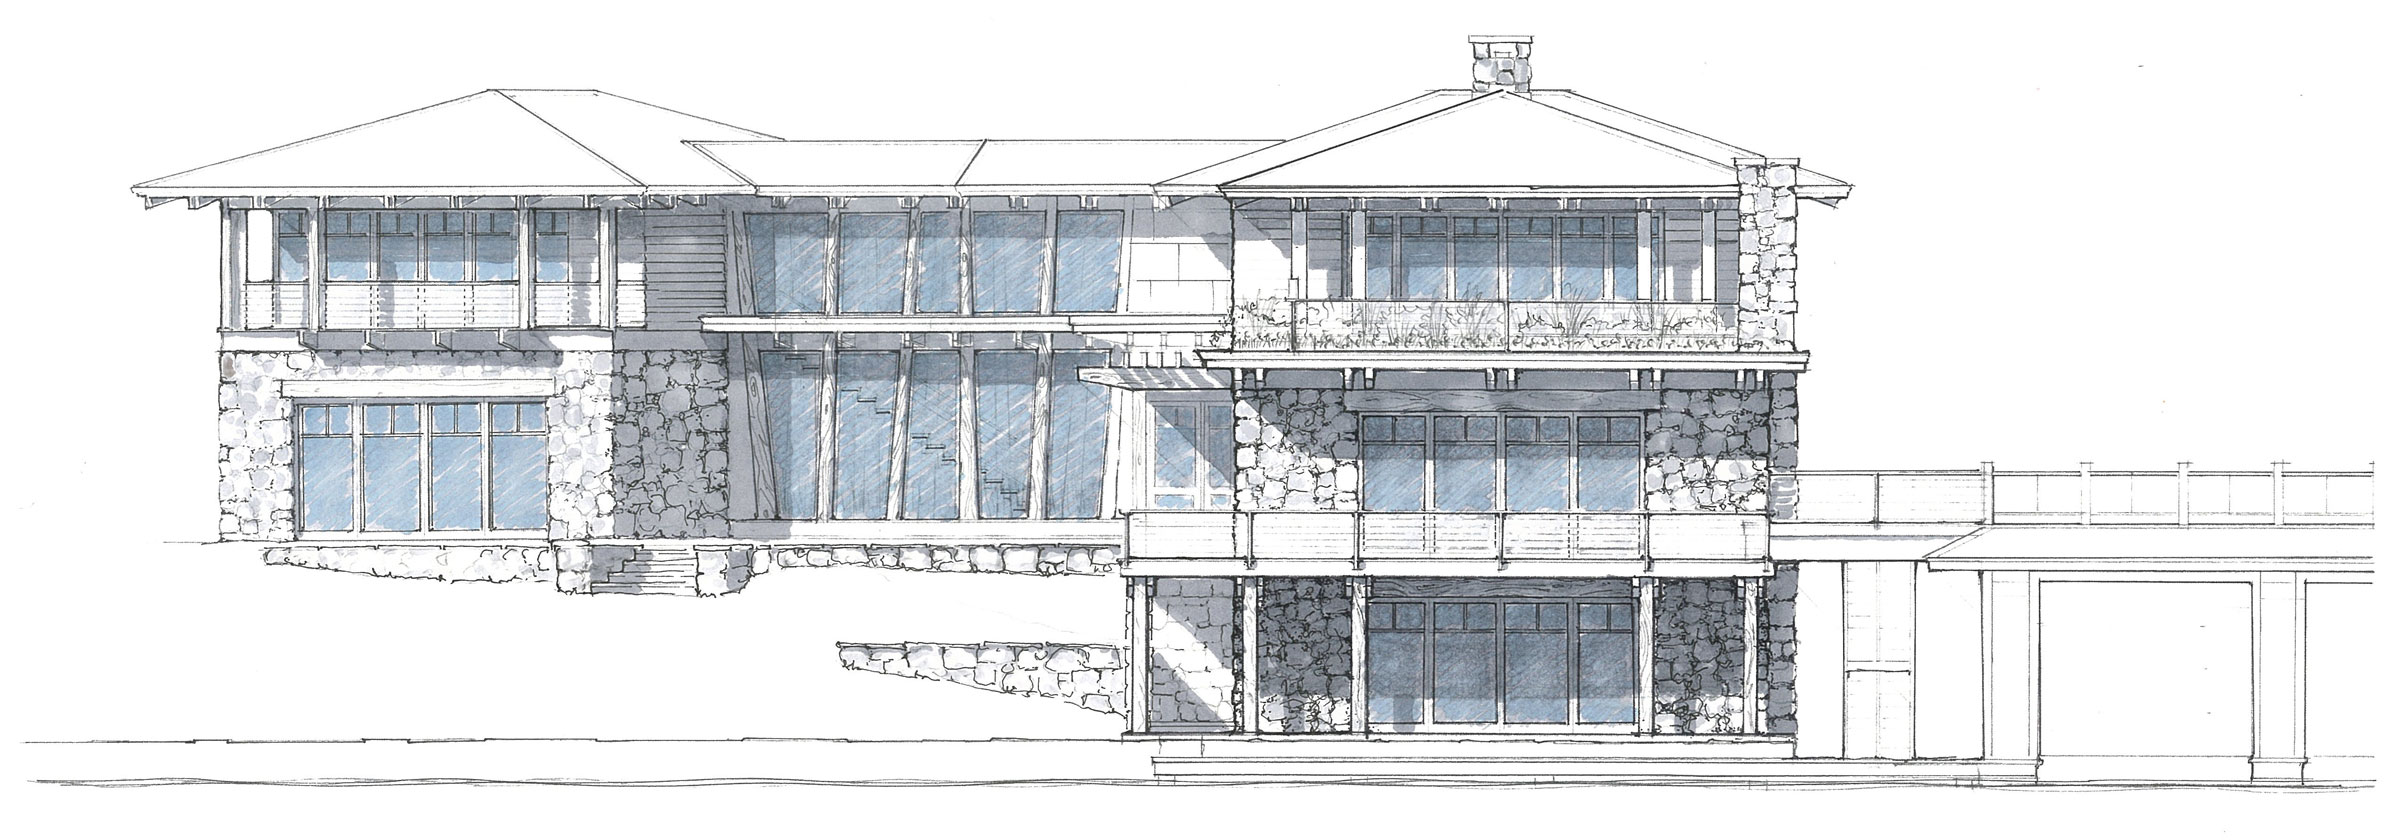 Verdant Architecture Technical Drawing of house from front view.